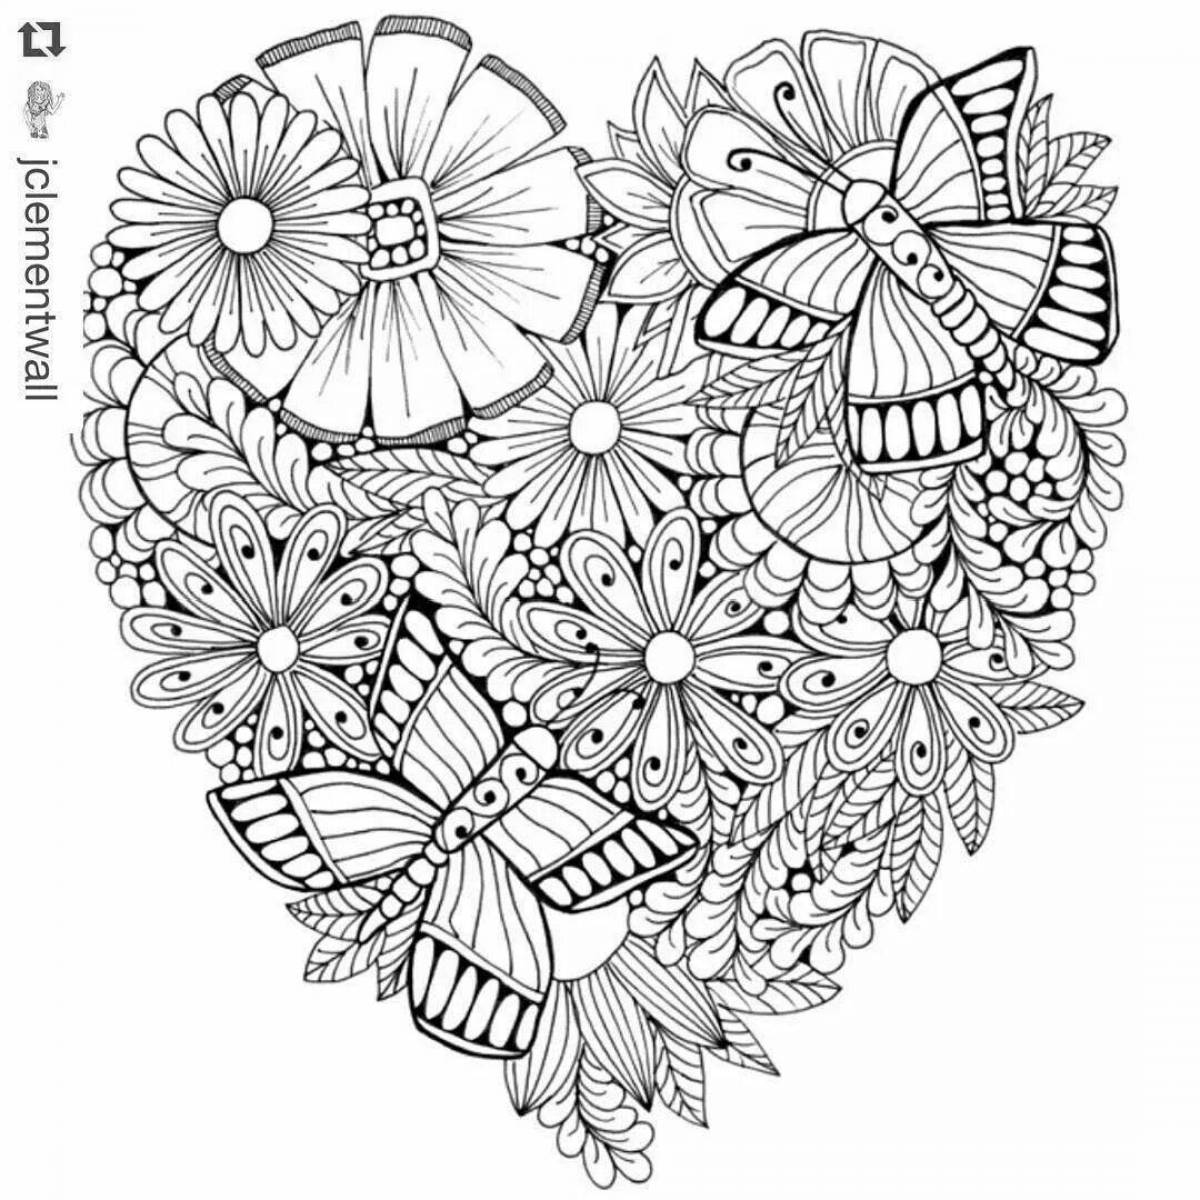 Intriguing intricate flower coloring book